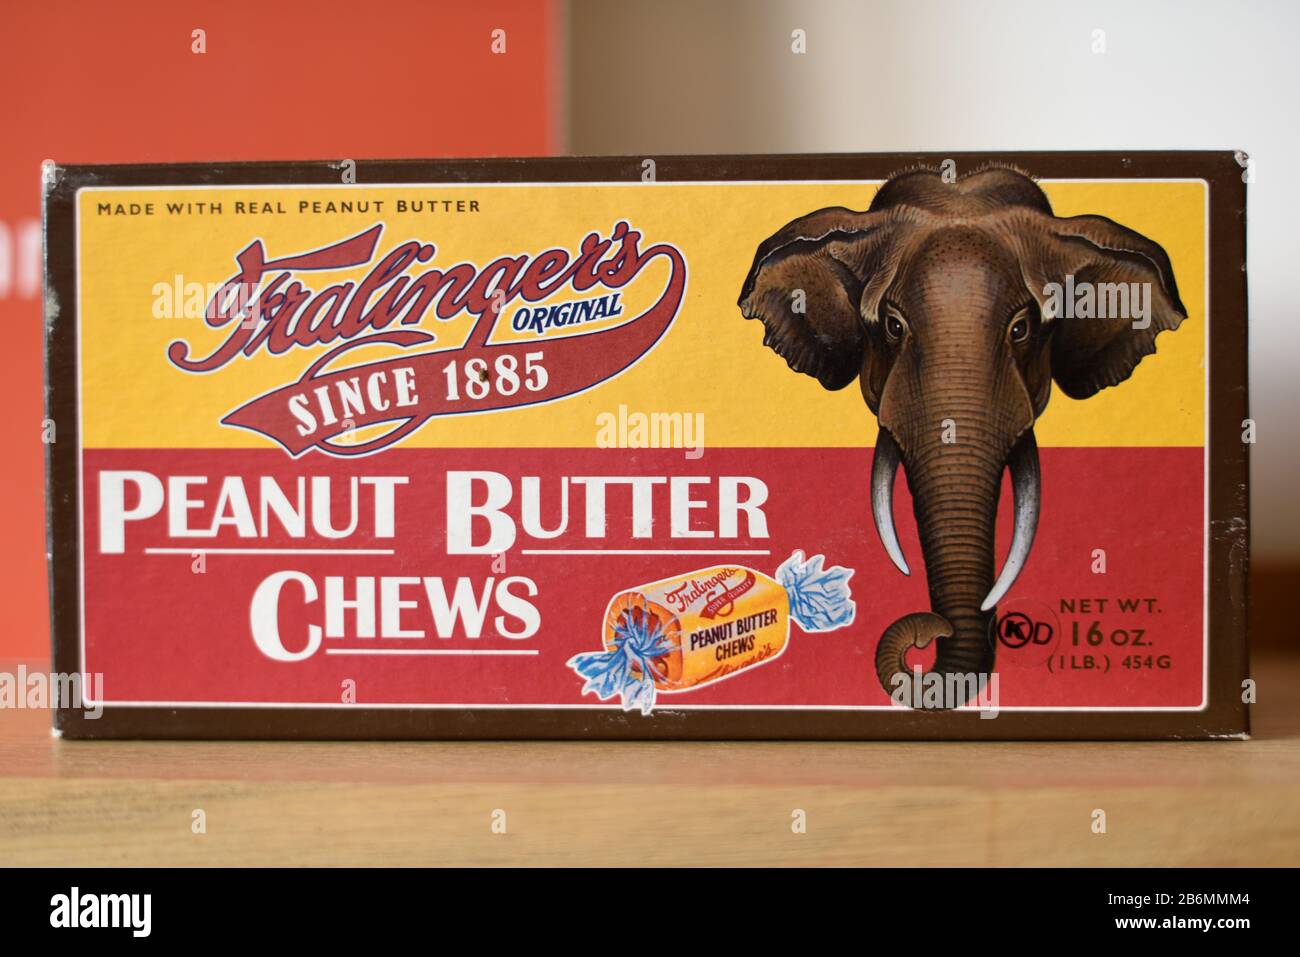 Vintage or Old Packaging for Peanut Butter Chews or Peanut Butter Sweets with Elephant as Symbol of Strength Stock Photo